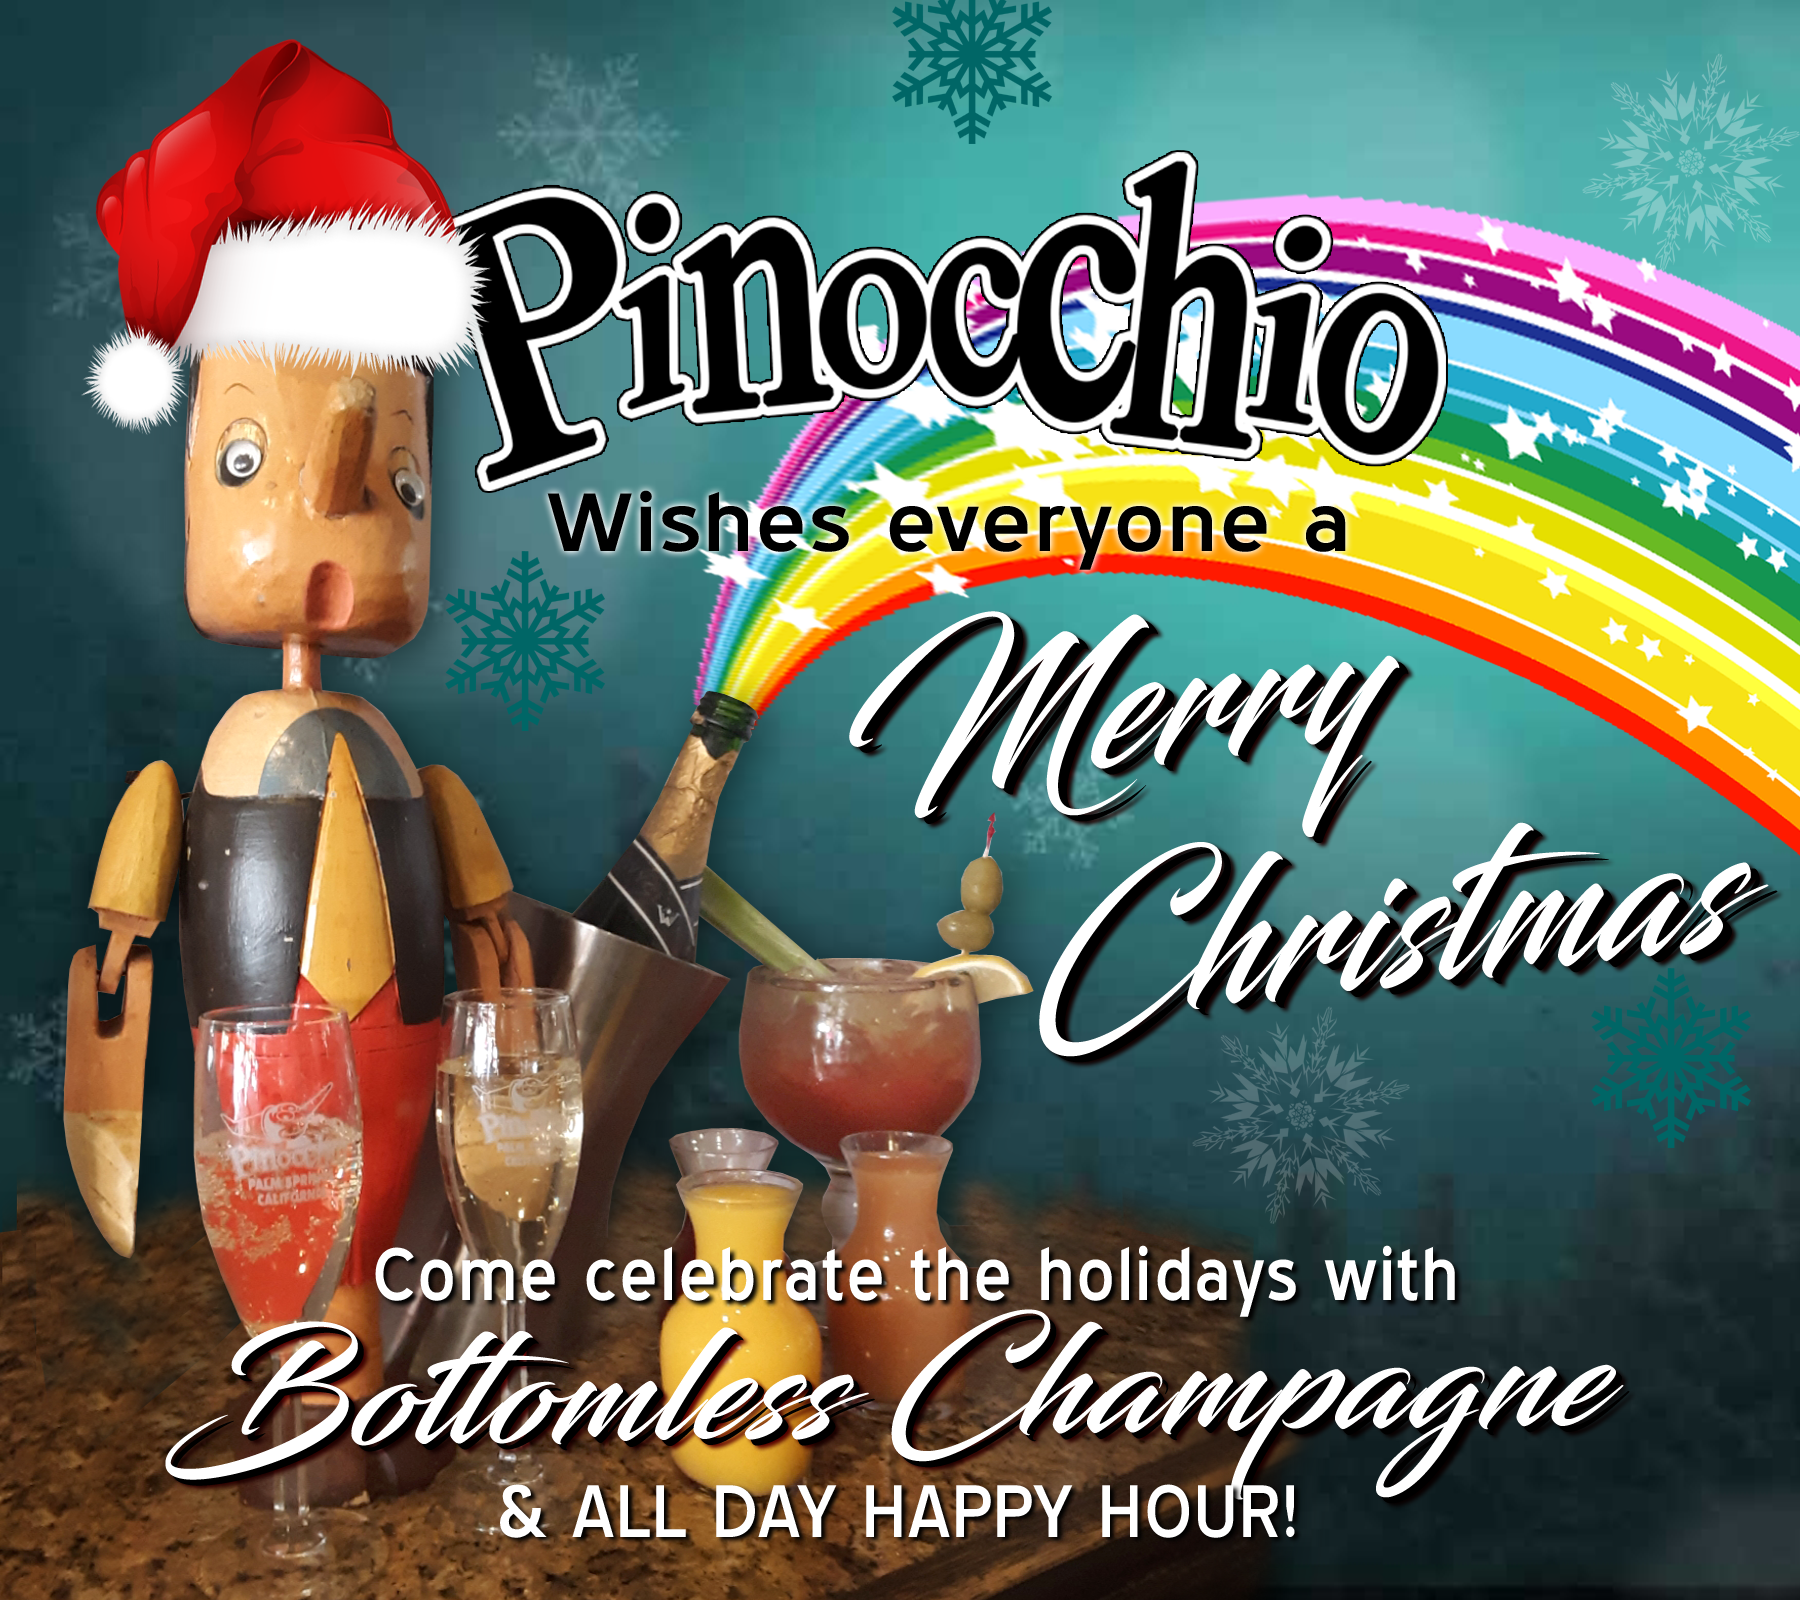 Merry Christmas from Pinocchios